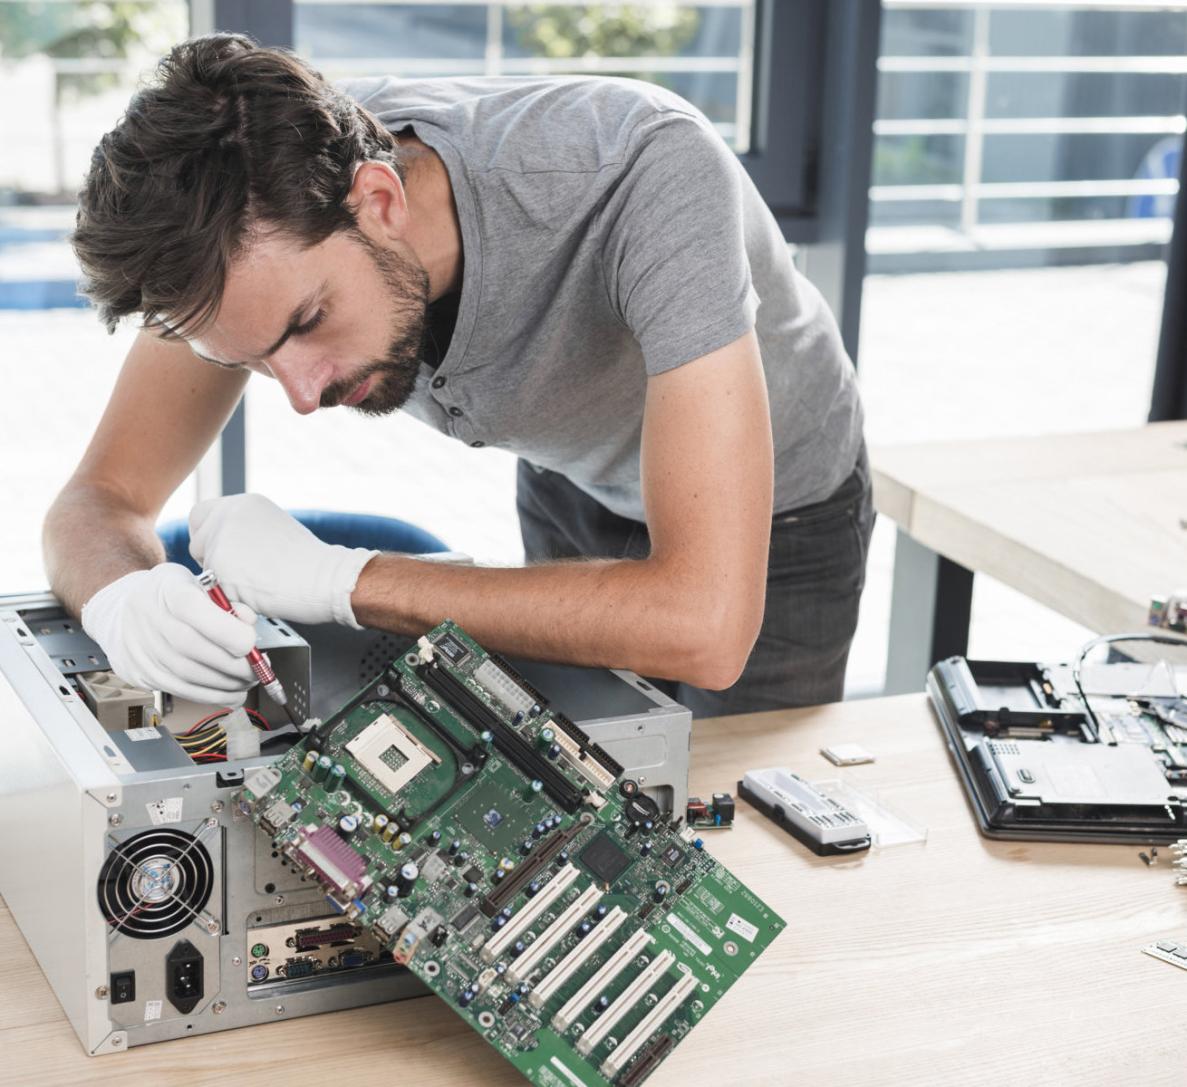 Is It Worth Investing in Professional Computer Hardware Repair Services?